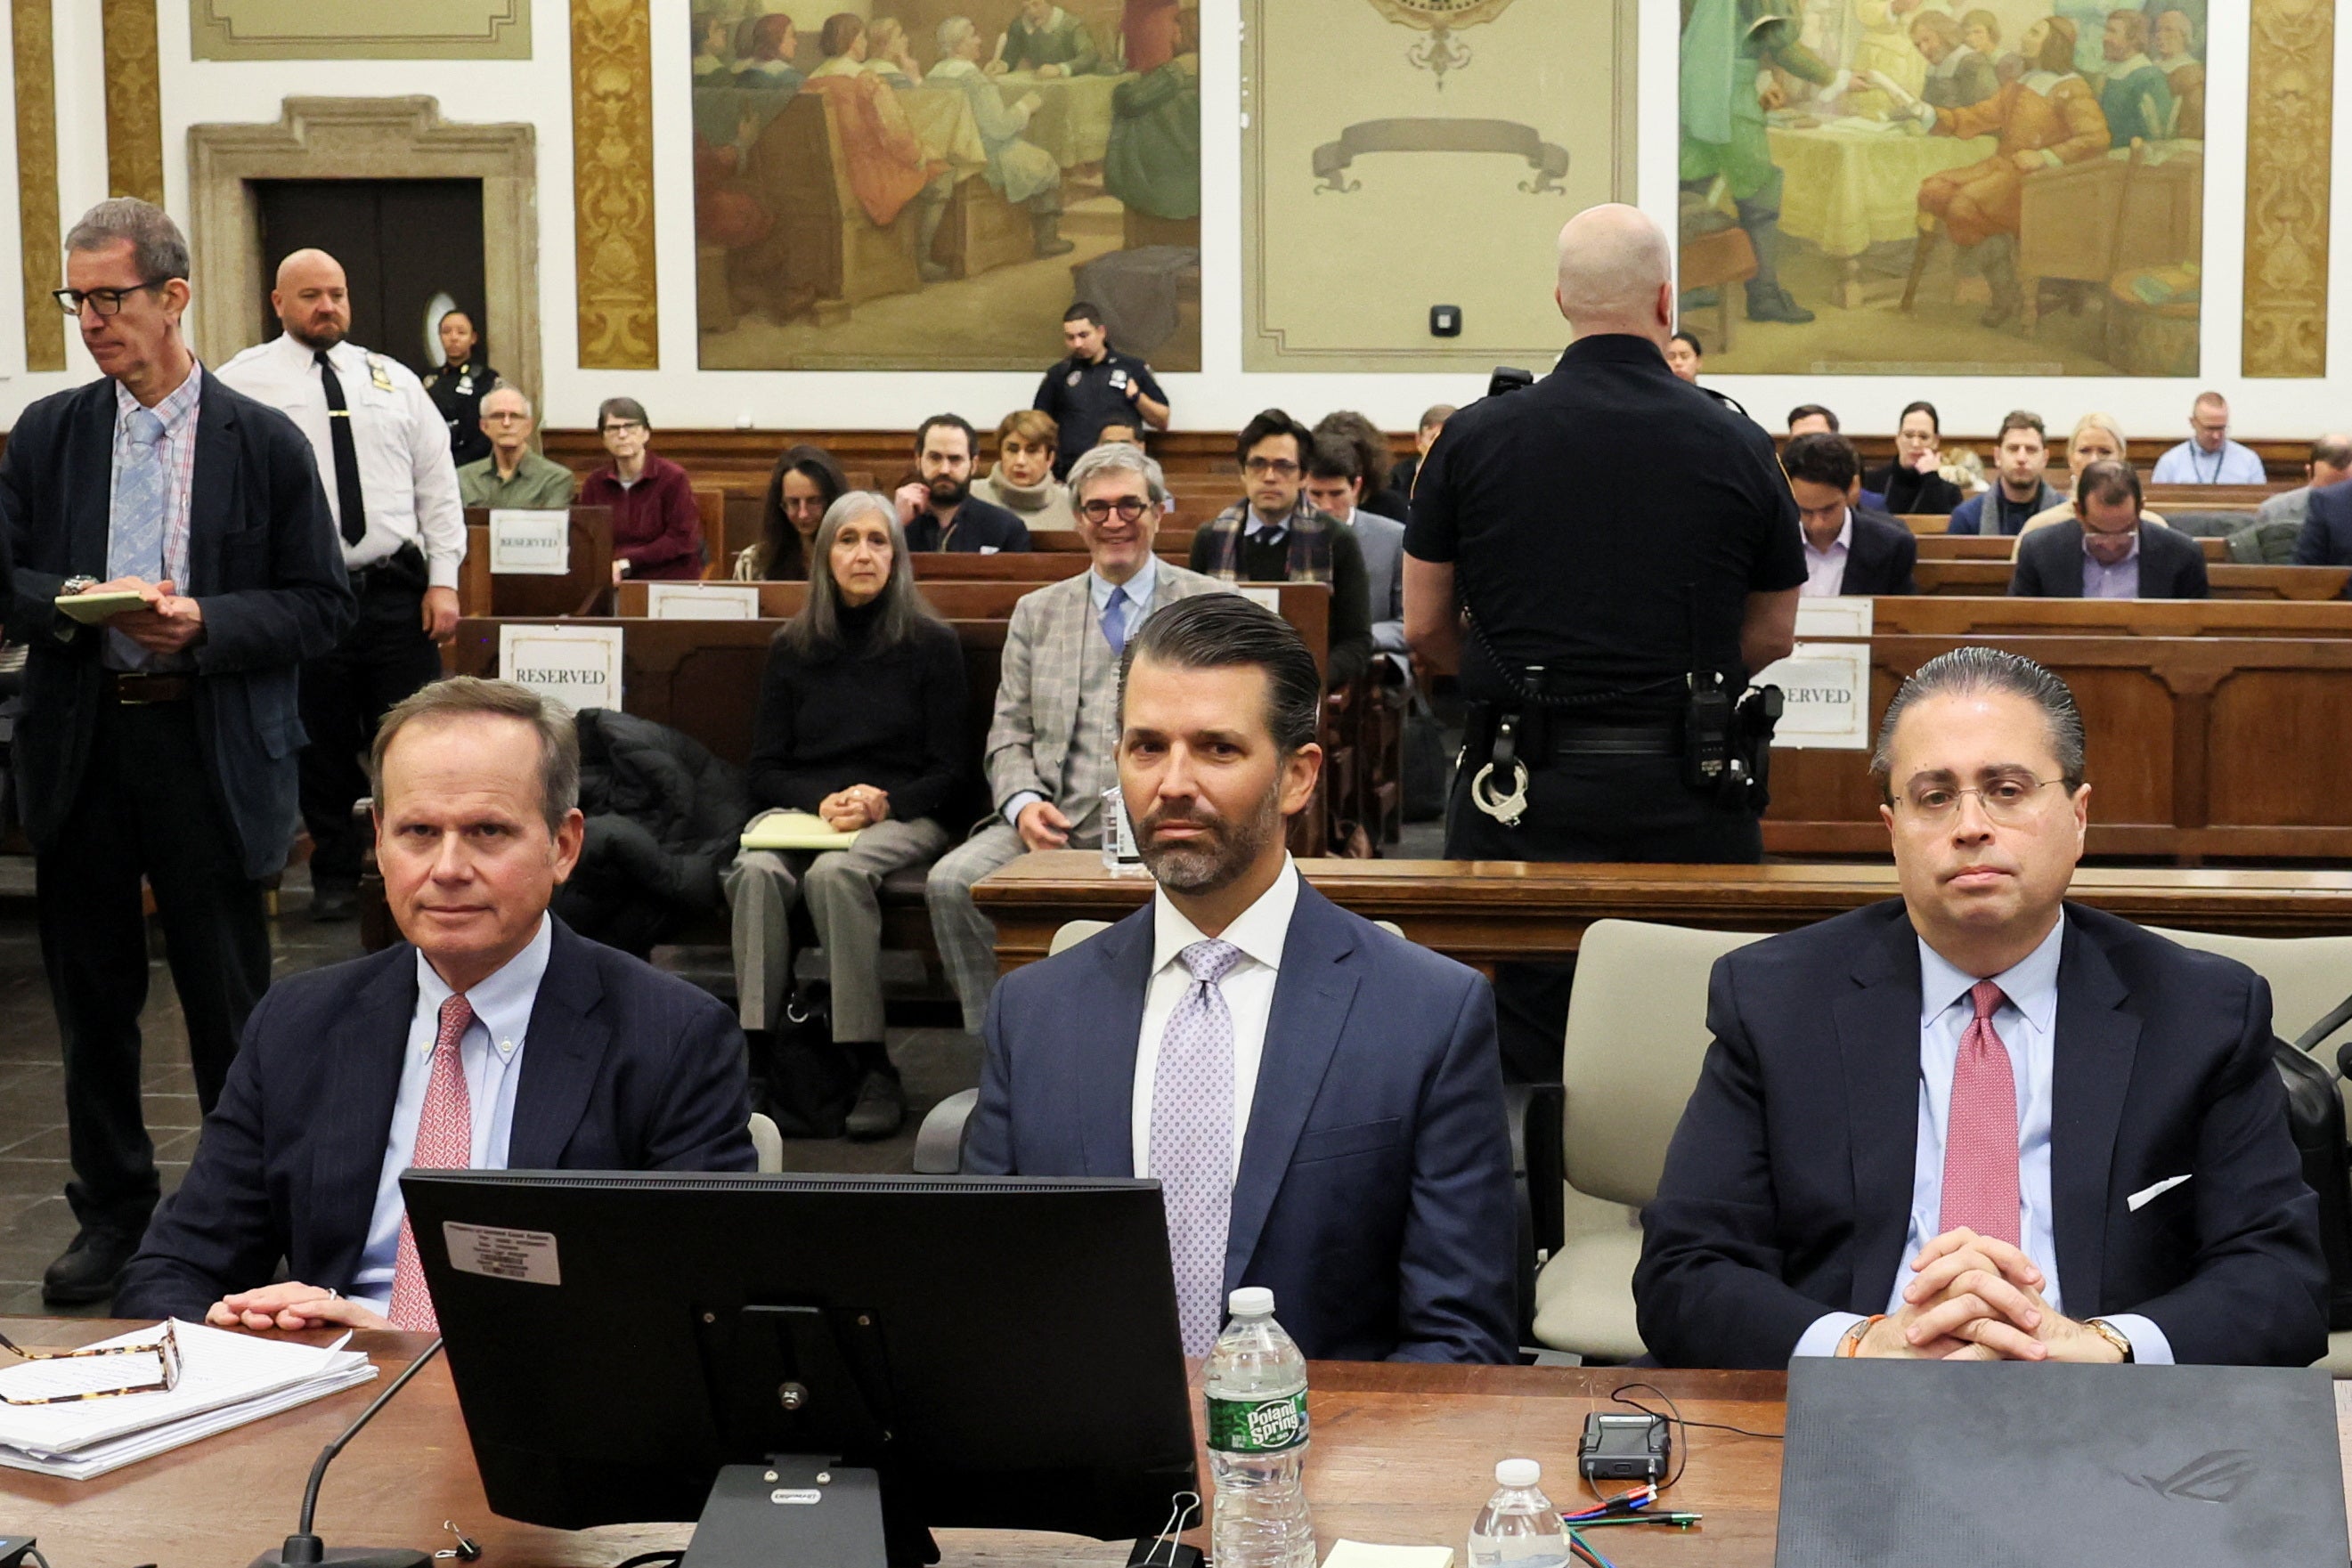 Donald Trump Jr sits with attorneys Christopher Kise, left, and Clifford Robert, right, on Monday